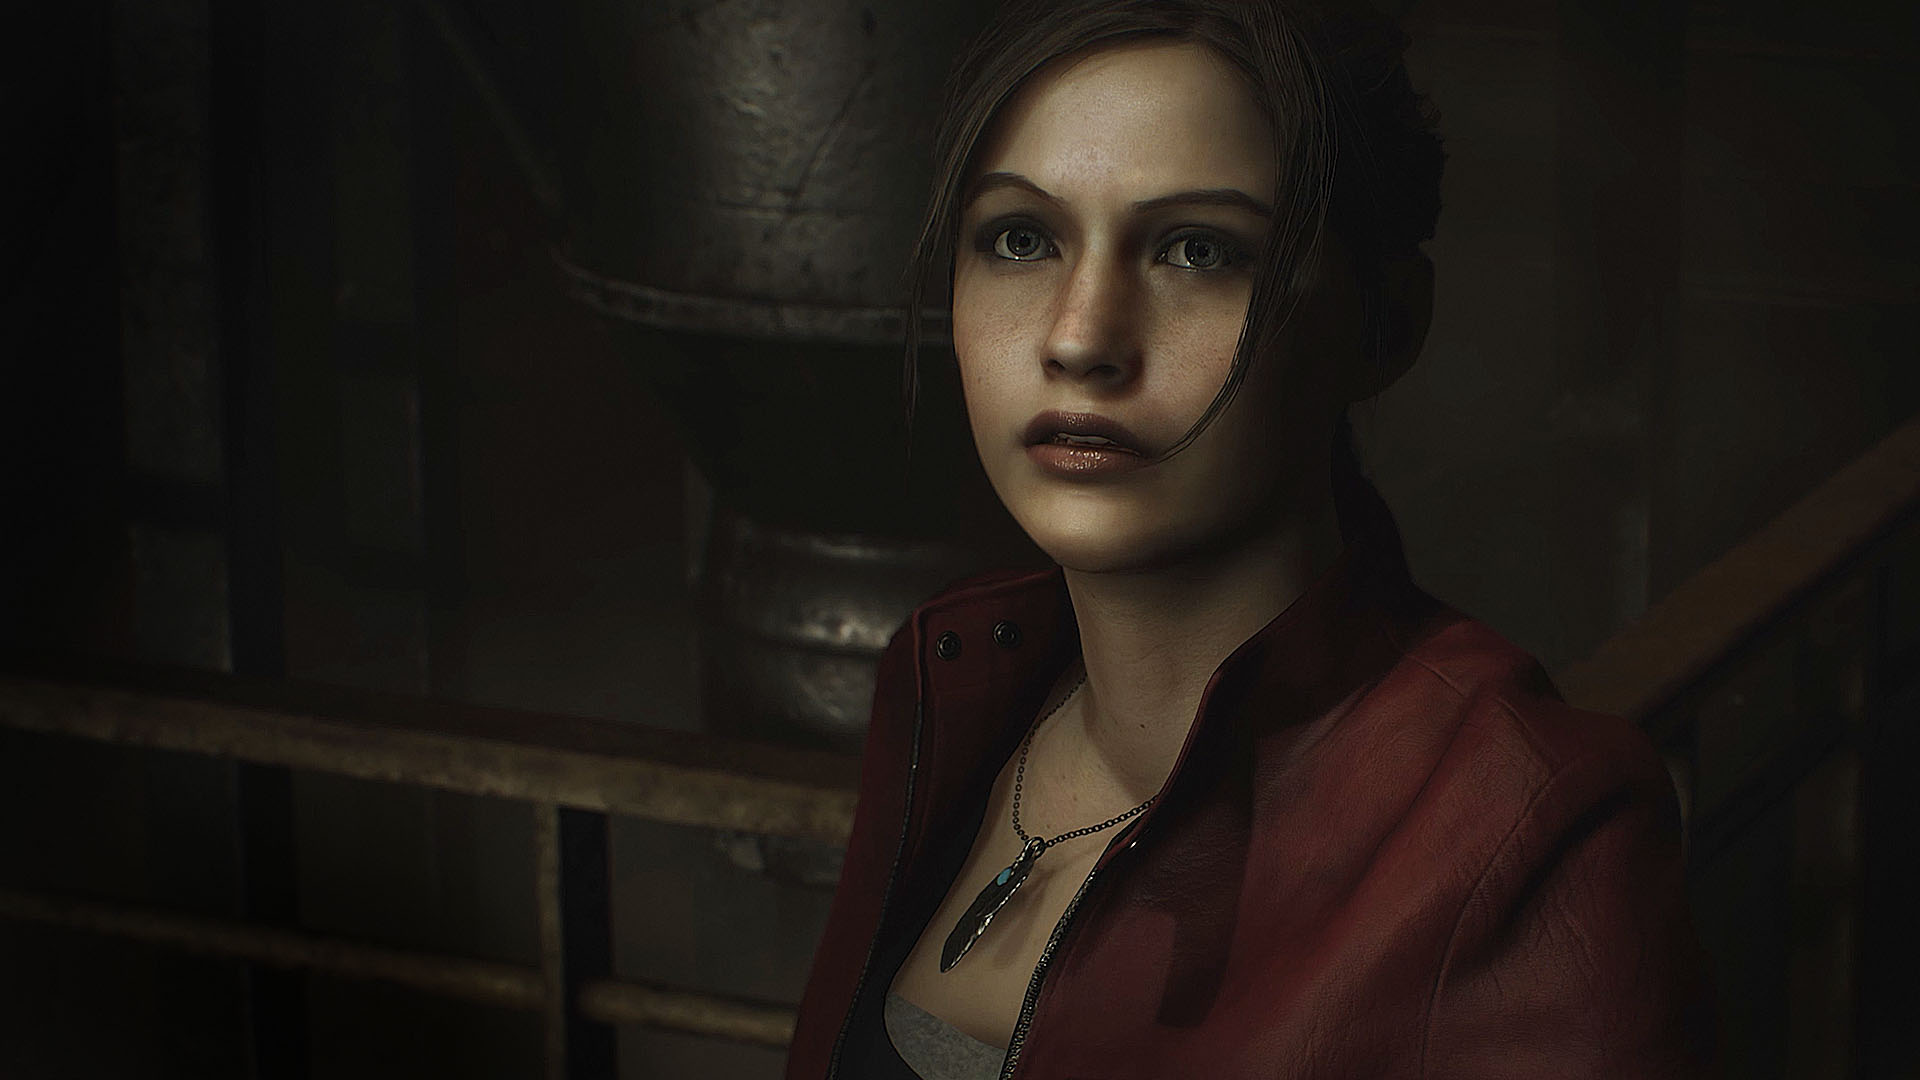 Claire Redfield - Code Veronica inspired